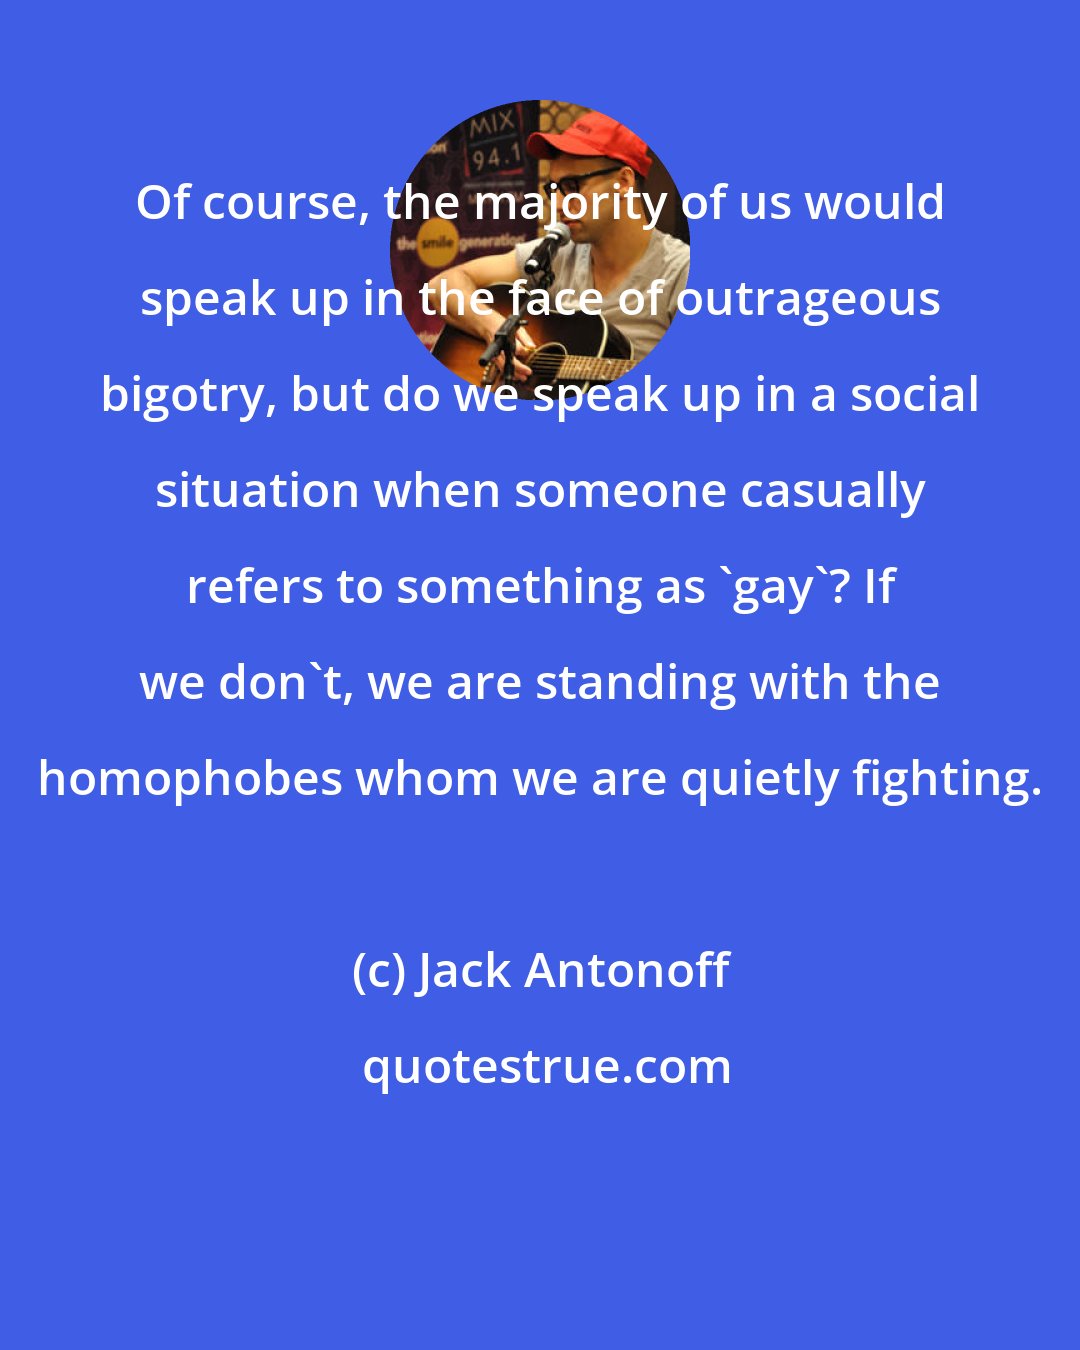 Jack Antonoff: Of course, the majority of us would speak up in the face of outrageous bigotry, but do we speak up in a social situation when someone casually refers to something as 'gay'? If we don't, we are standing with the homophobes whom we are quietly fighting.